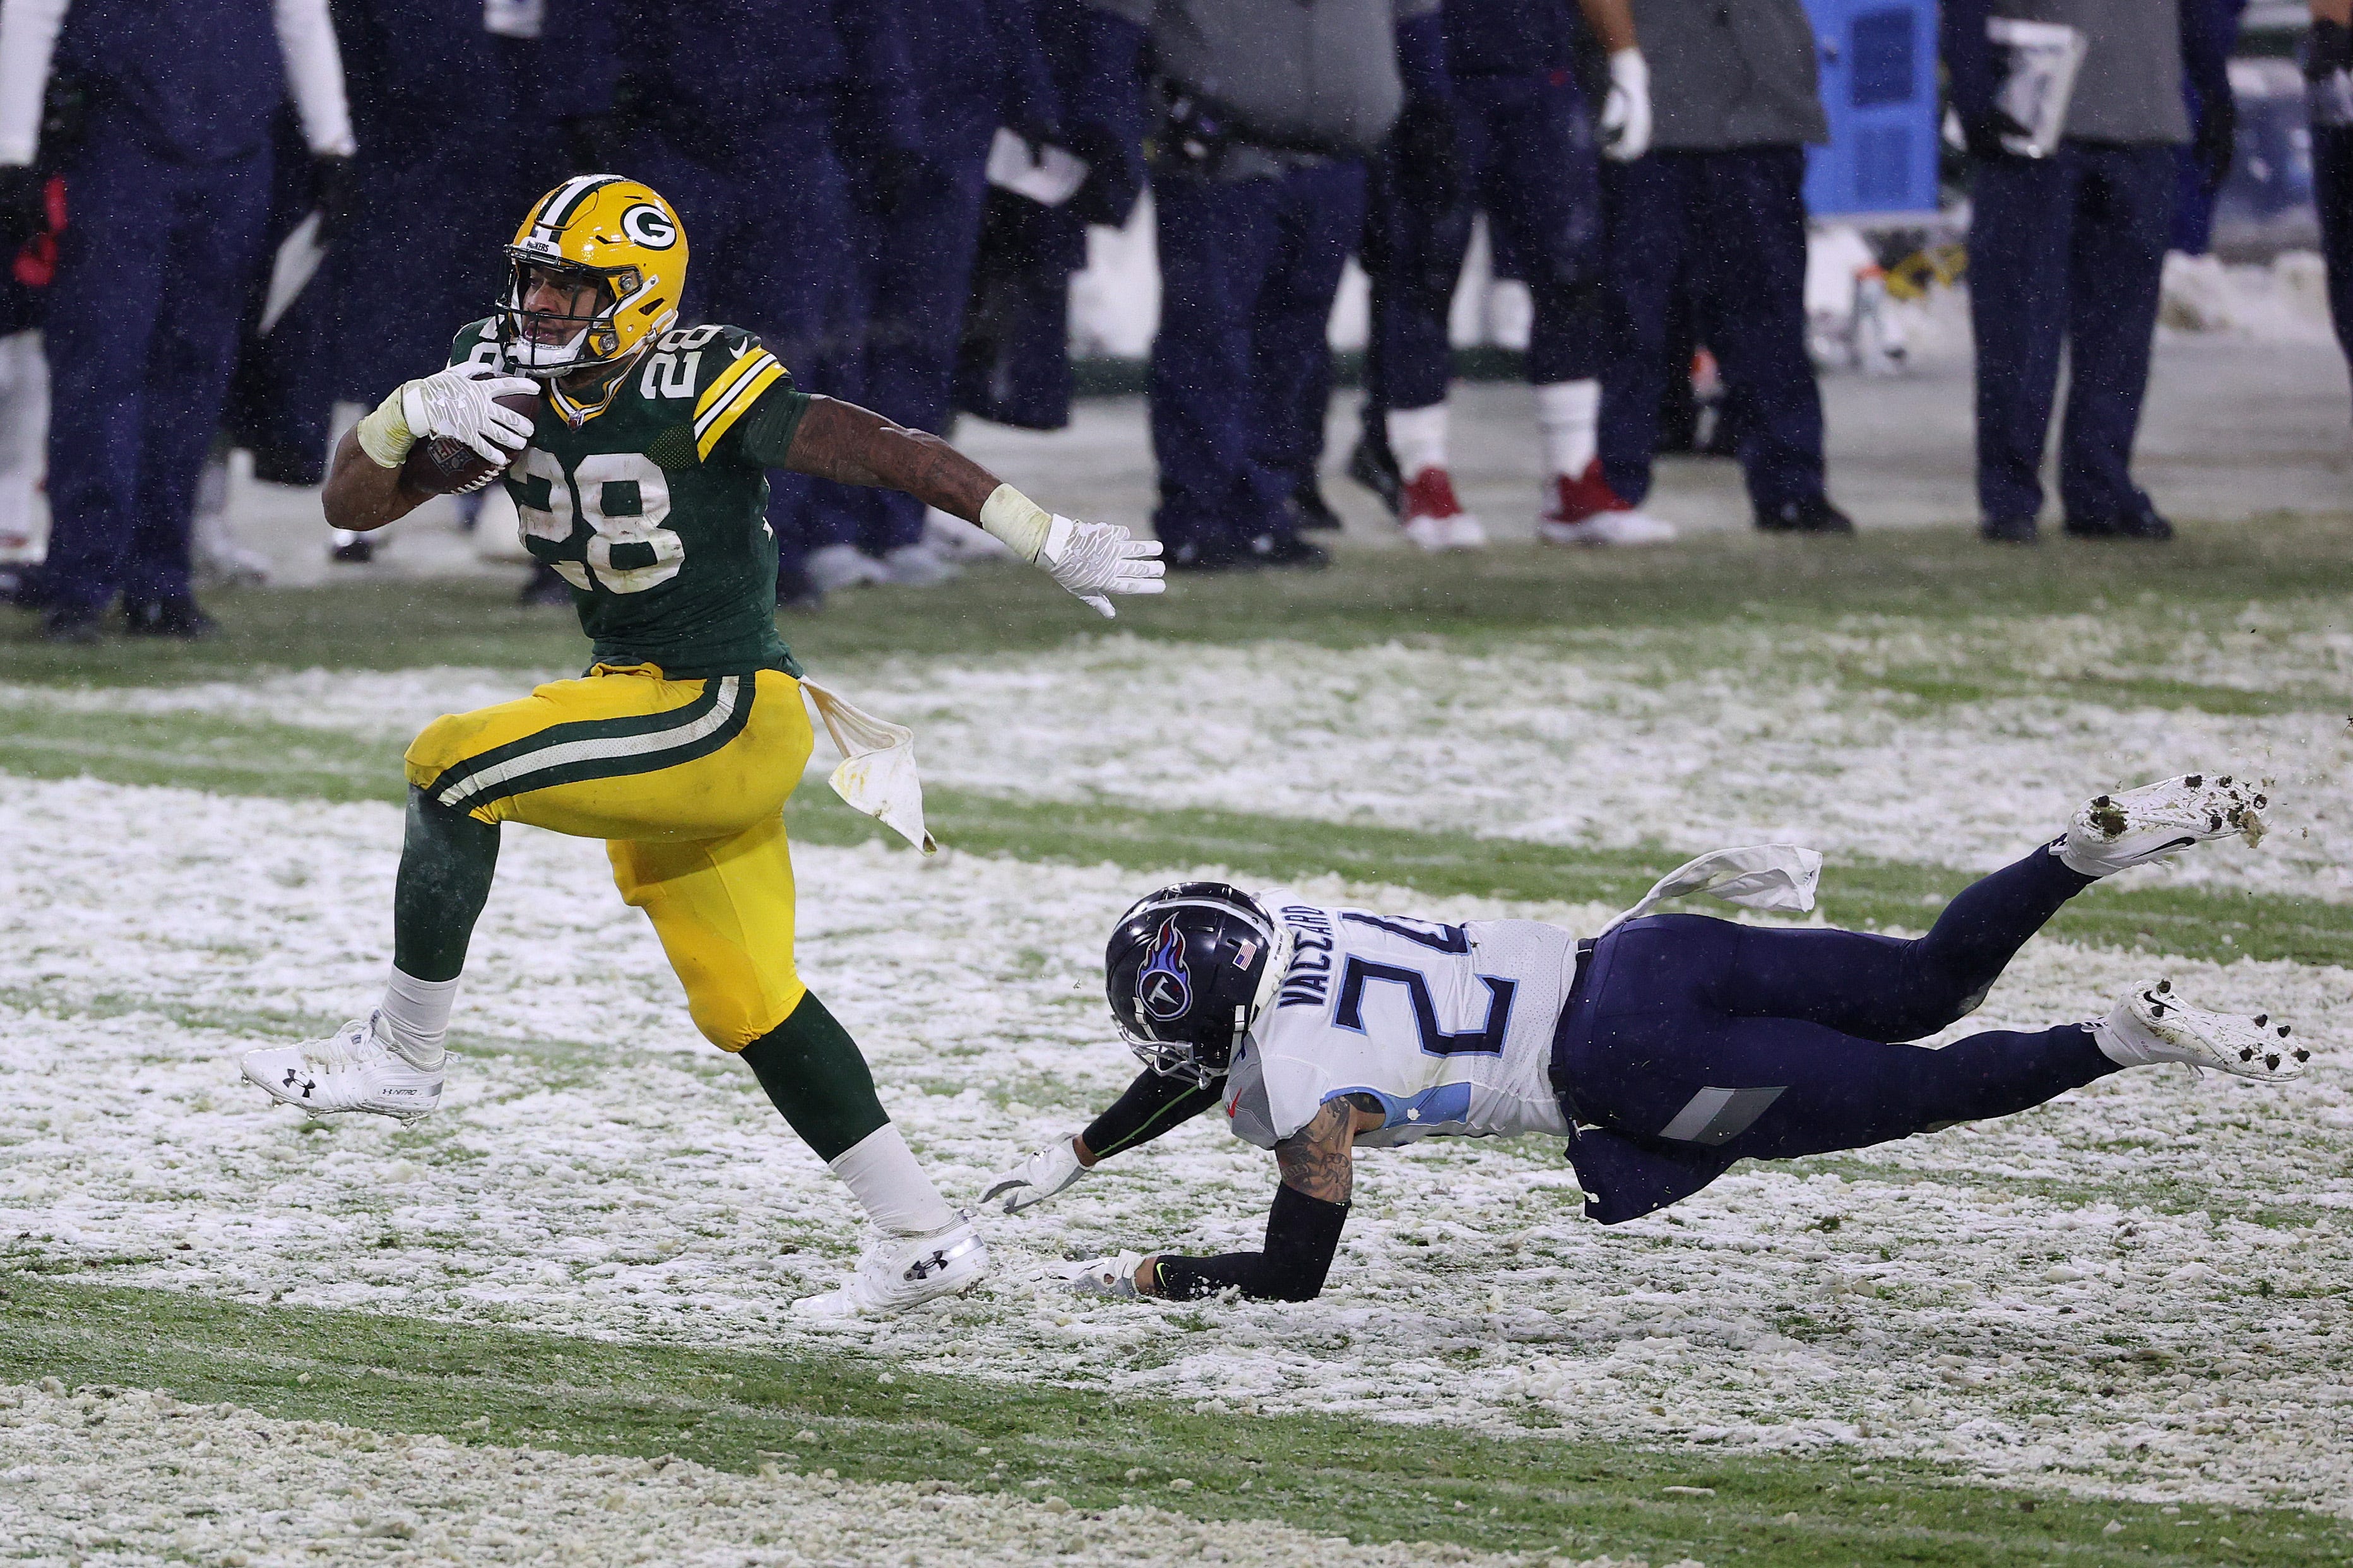 It's coming:' The time is now for Packers RB AJ Dillon, NFL unicorn